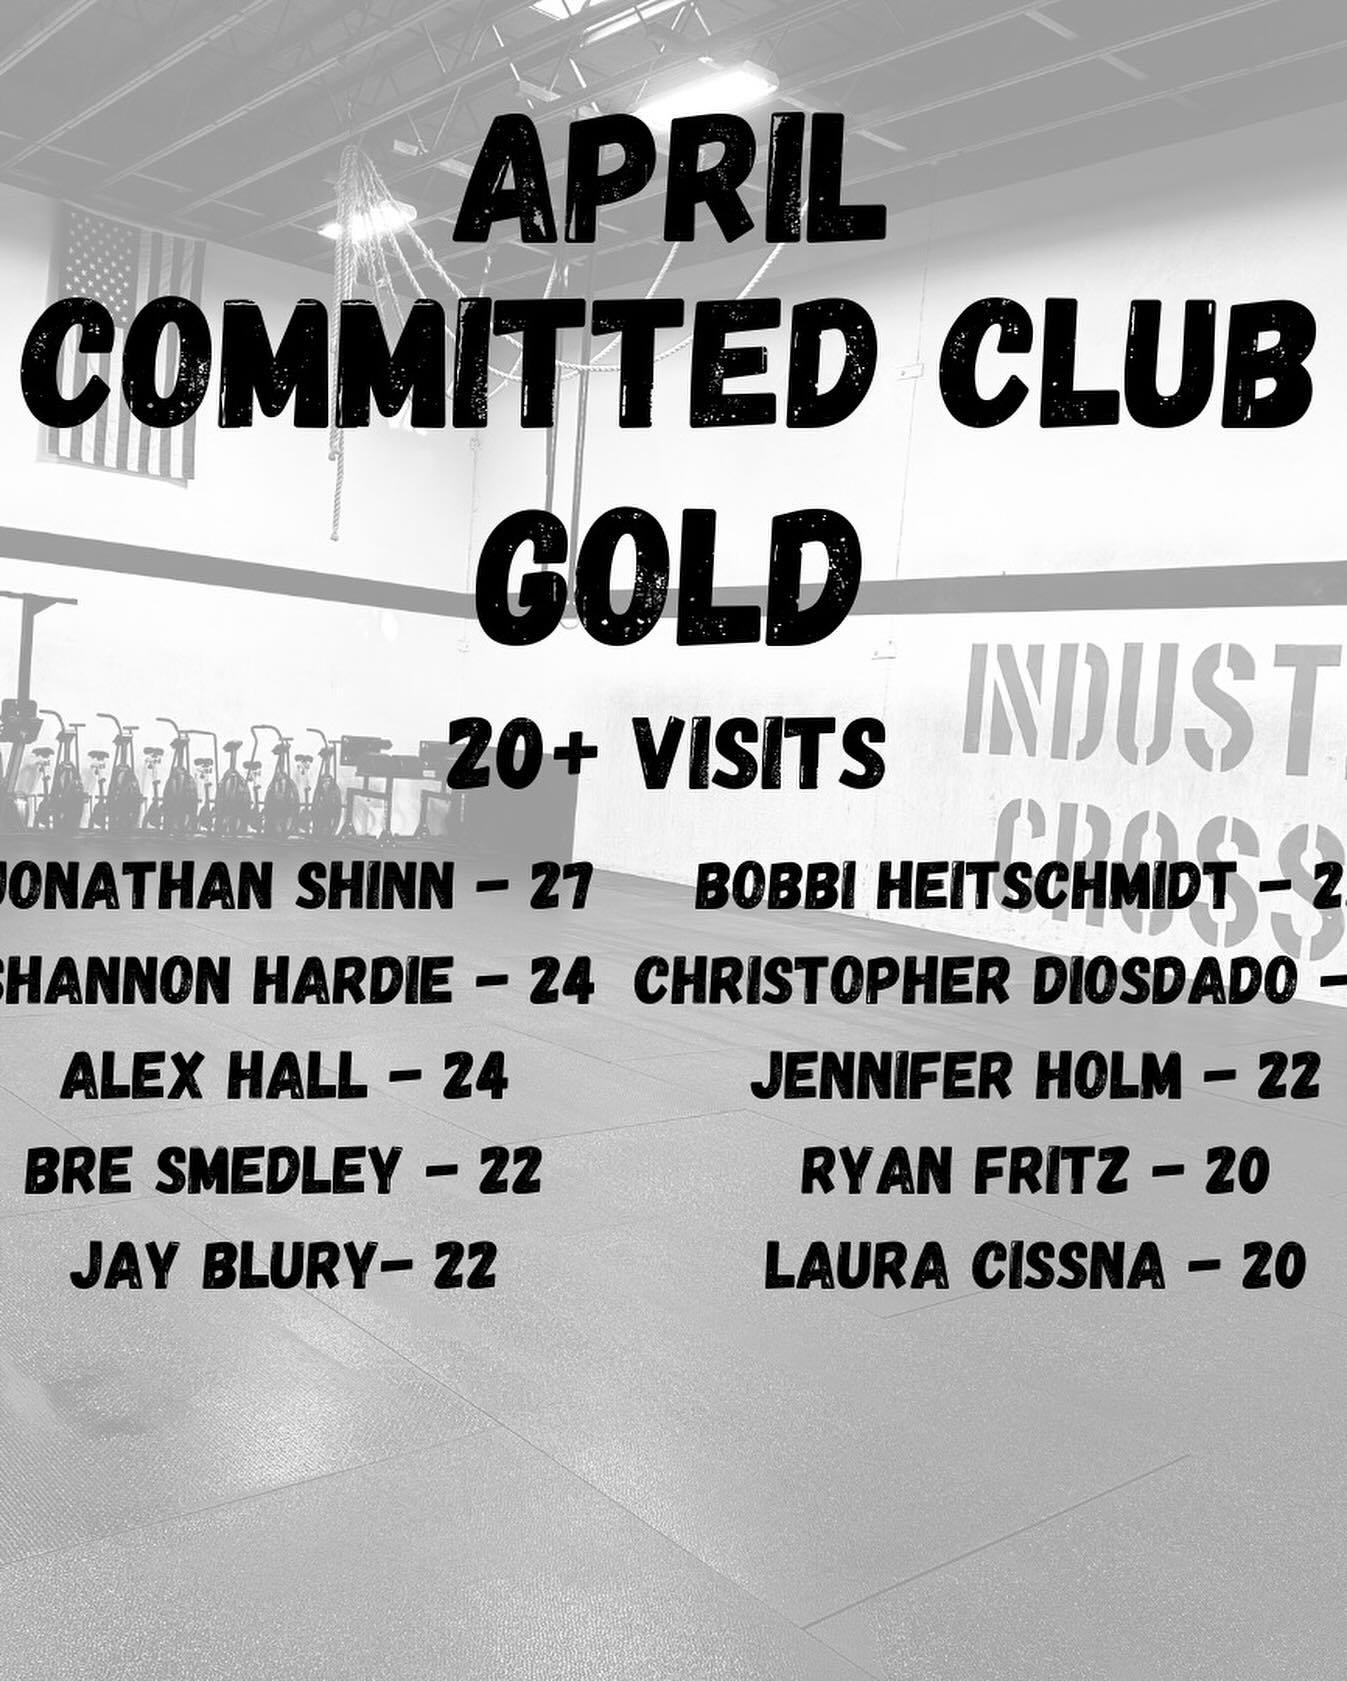 💥APRIL COMMITTED CLUB 💥
Congratulations to all those who made the committed club last month. We love seeing some of the same names every month and extra love seeing lots of new names this time around. Keep showing up athletes.
.
🌟 HONORABLE MENTIO